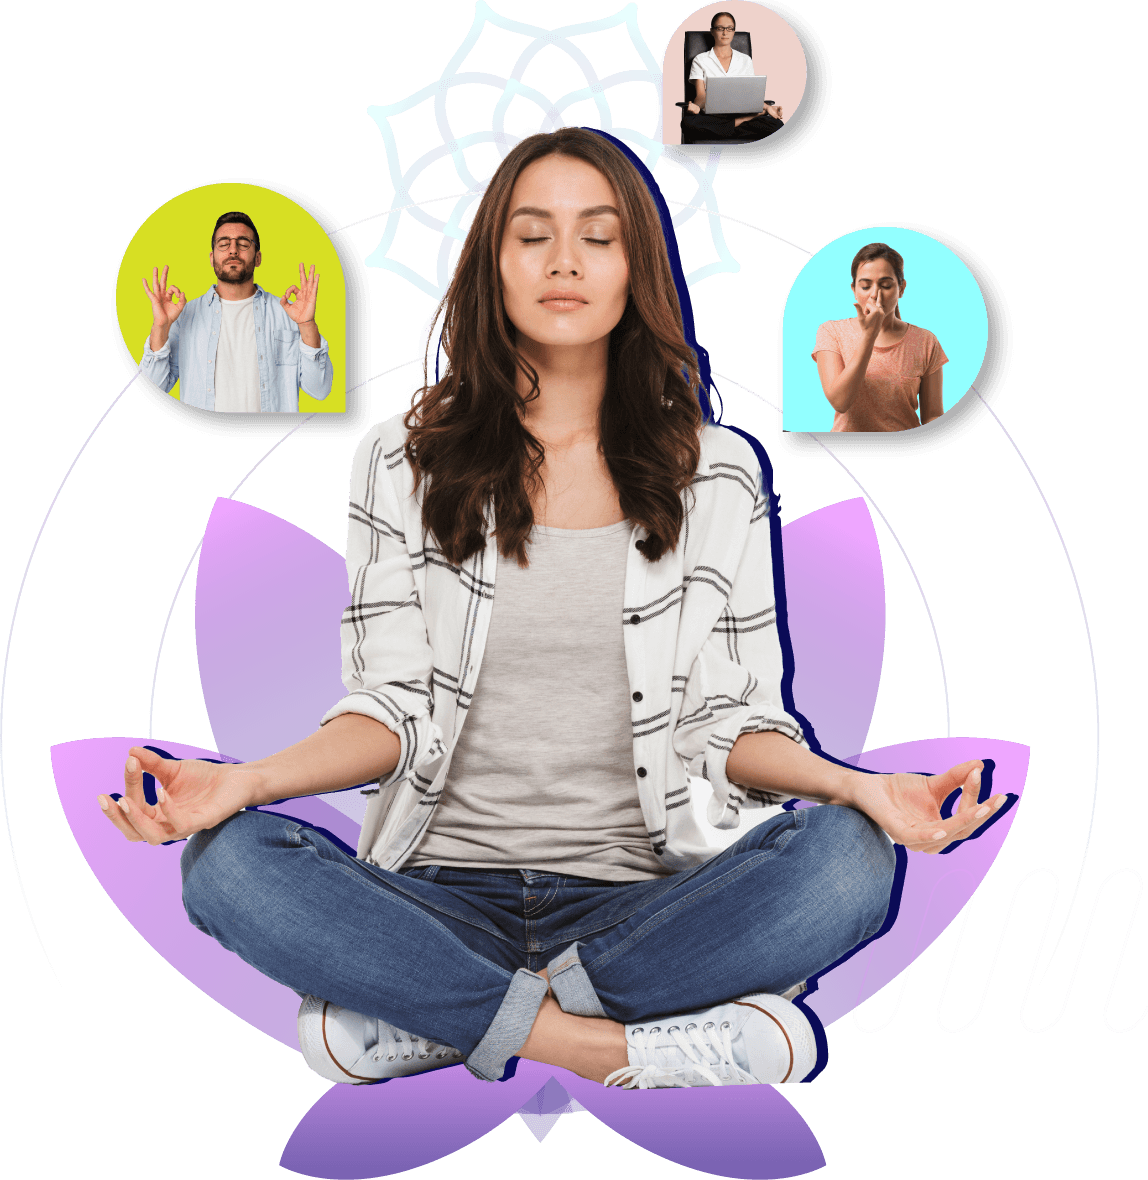 Virtual Wellness Course to Reduce Stress and Find Balance